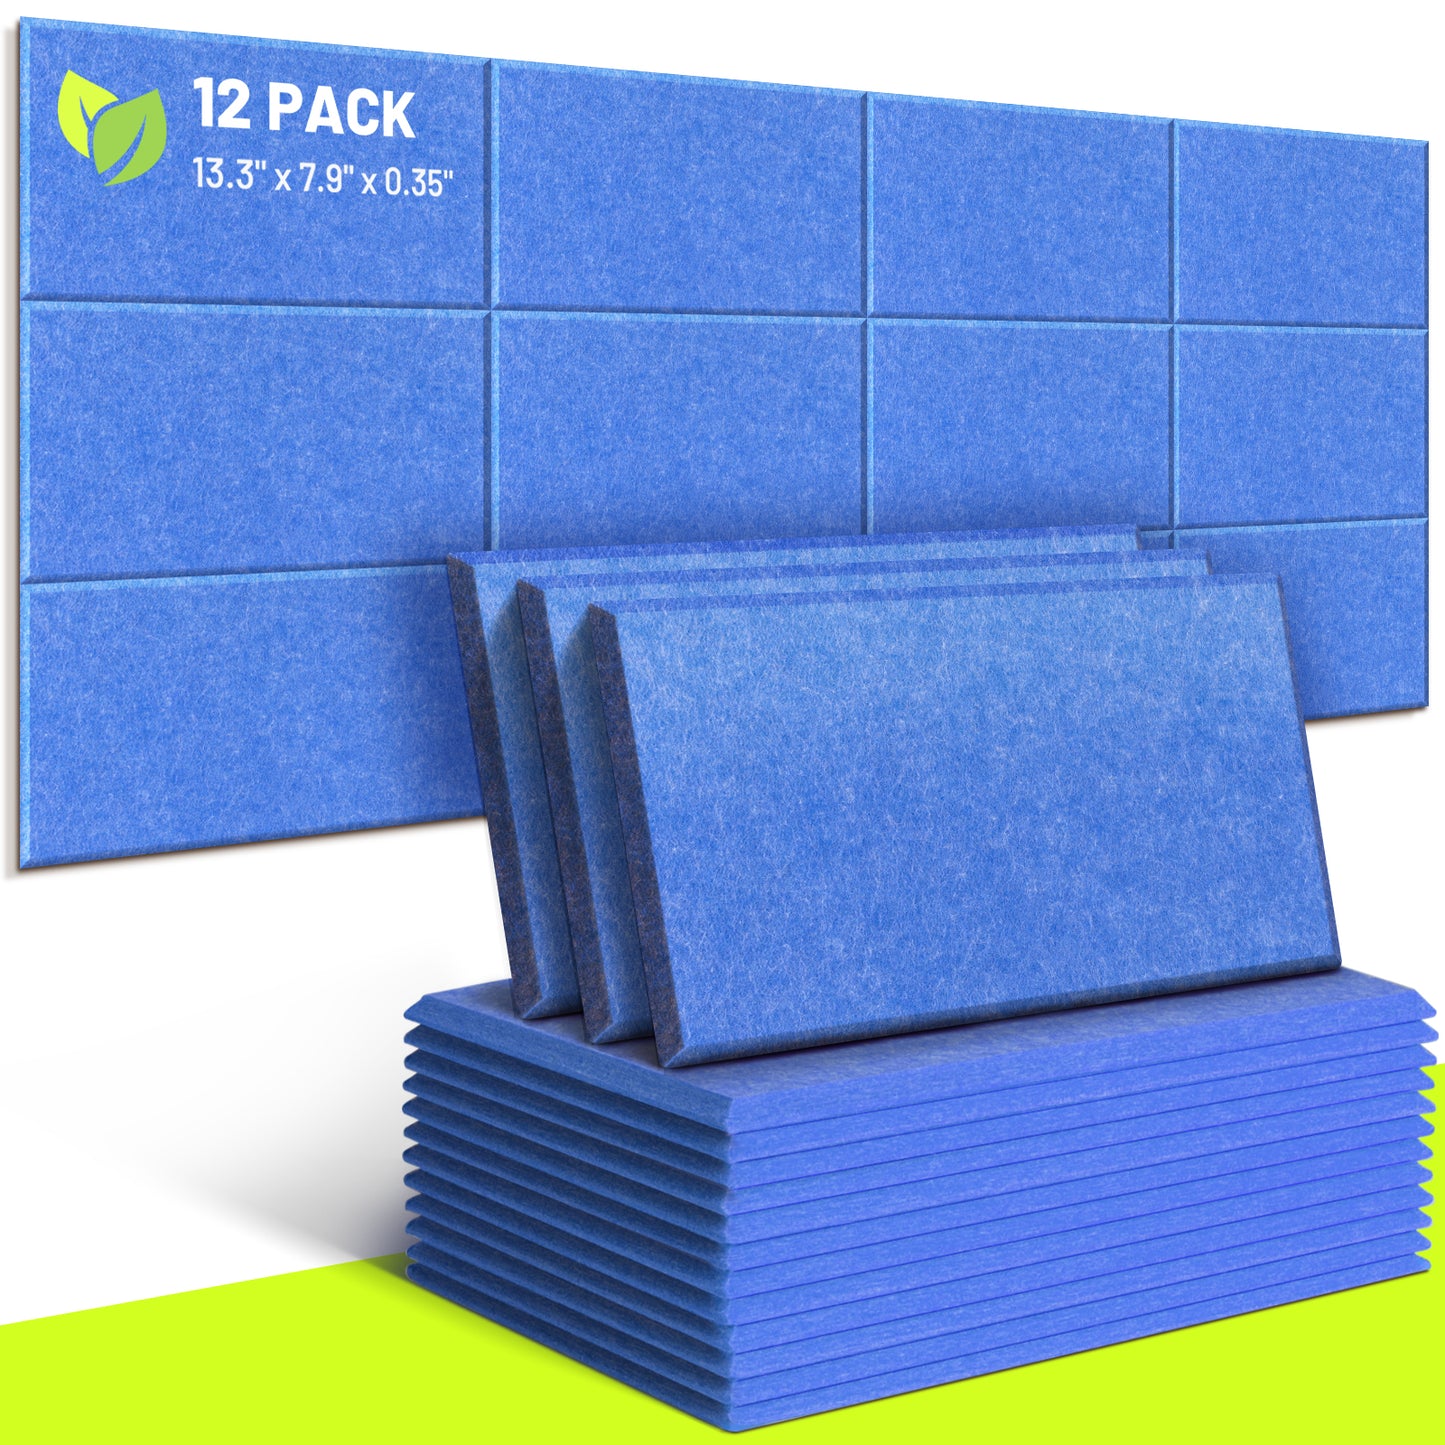 12 Pack Acoustic Panels (Non Self-Adhesive) CY0313